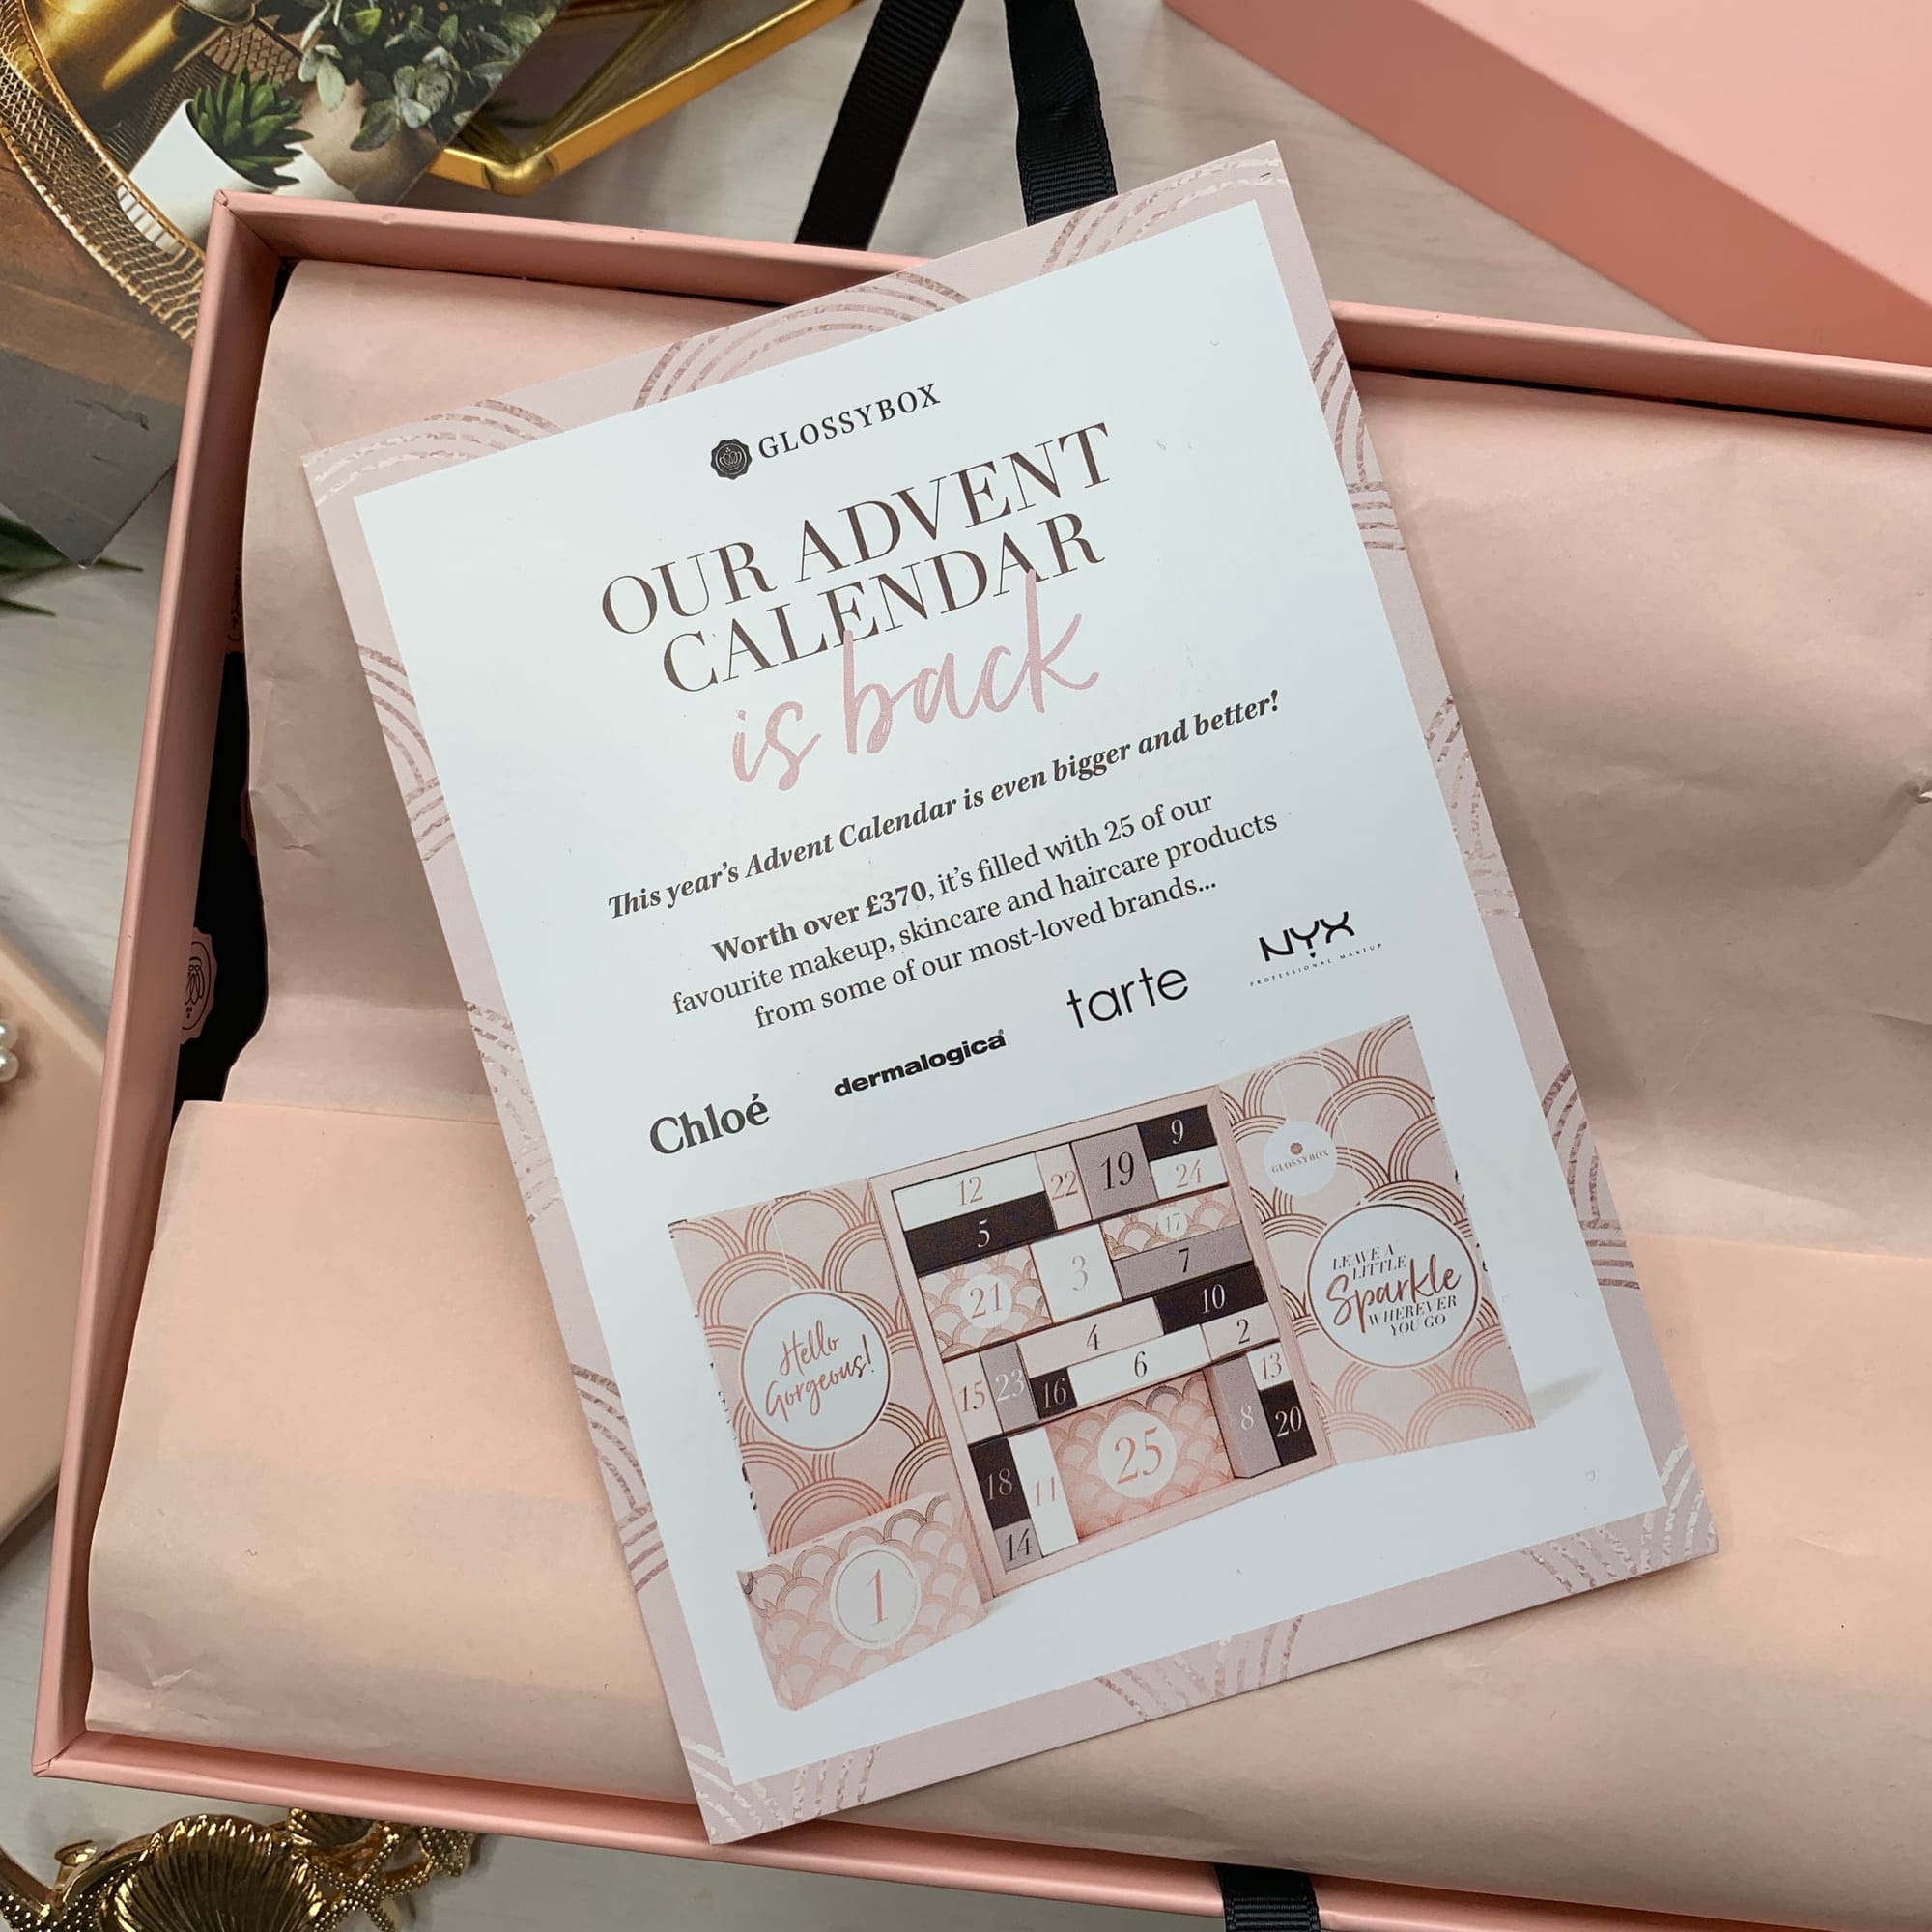 Glossybox Advent Calendar Reminder  - Glossybox September 2019 Delicious Beauty - Miss Boux